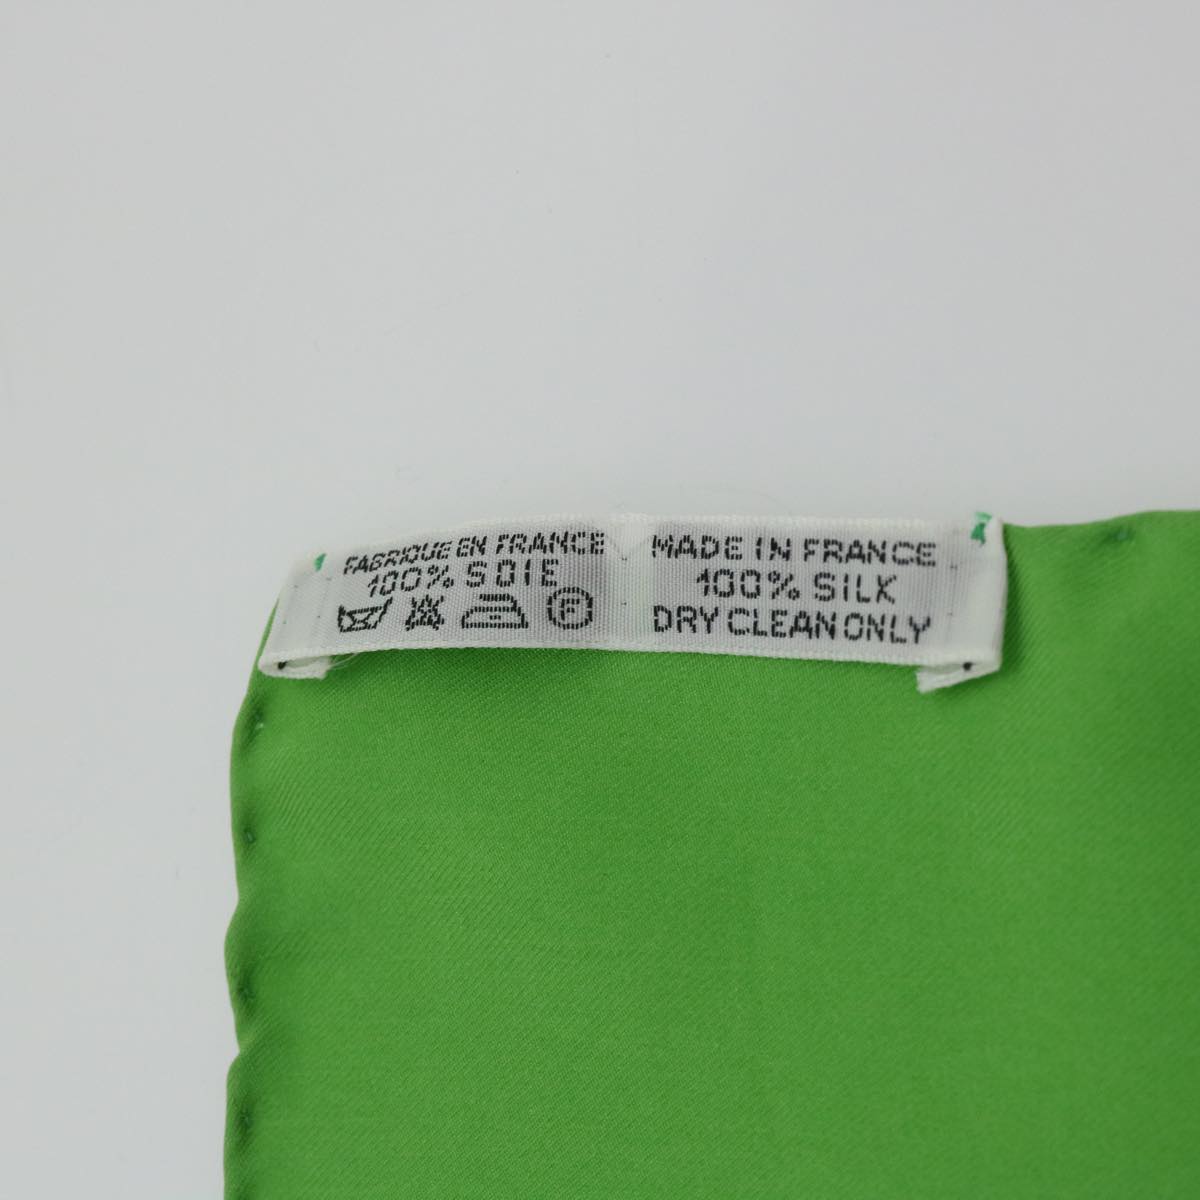 HERMES Carre 90 BRAZIL Scarf Silk Green Auth 52775